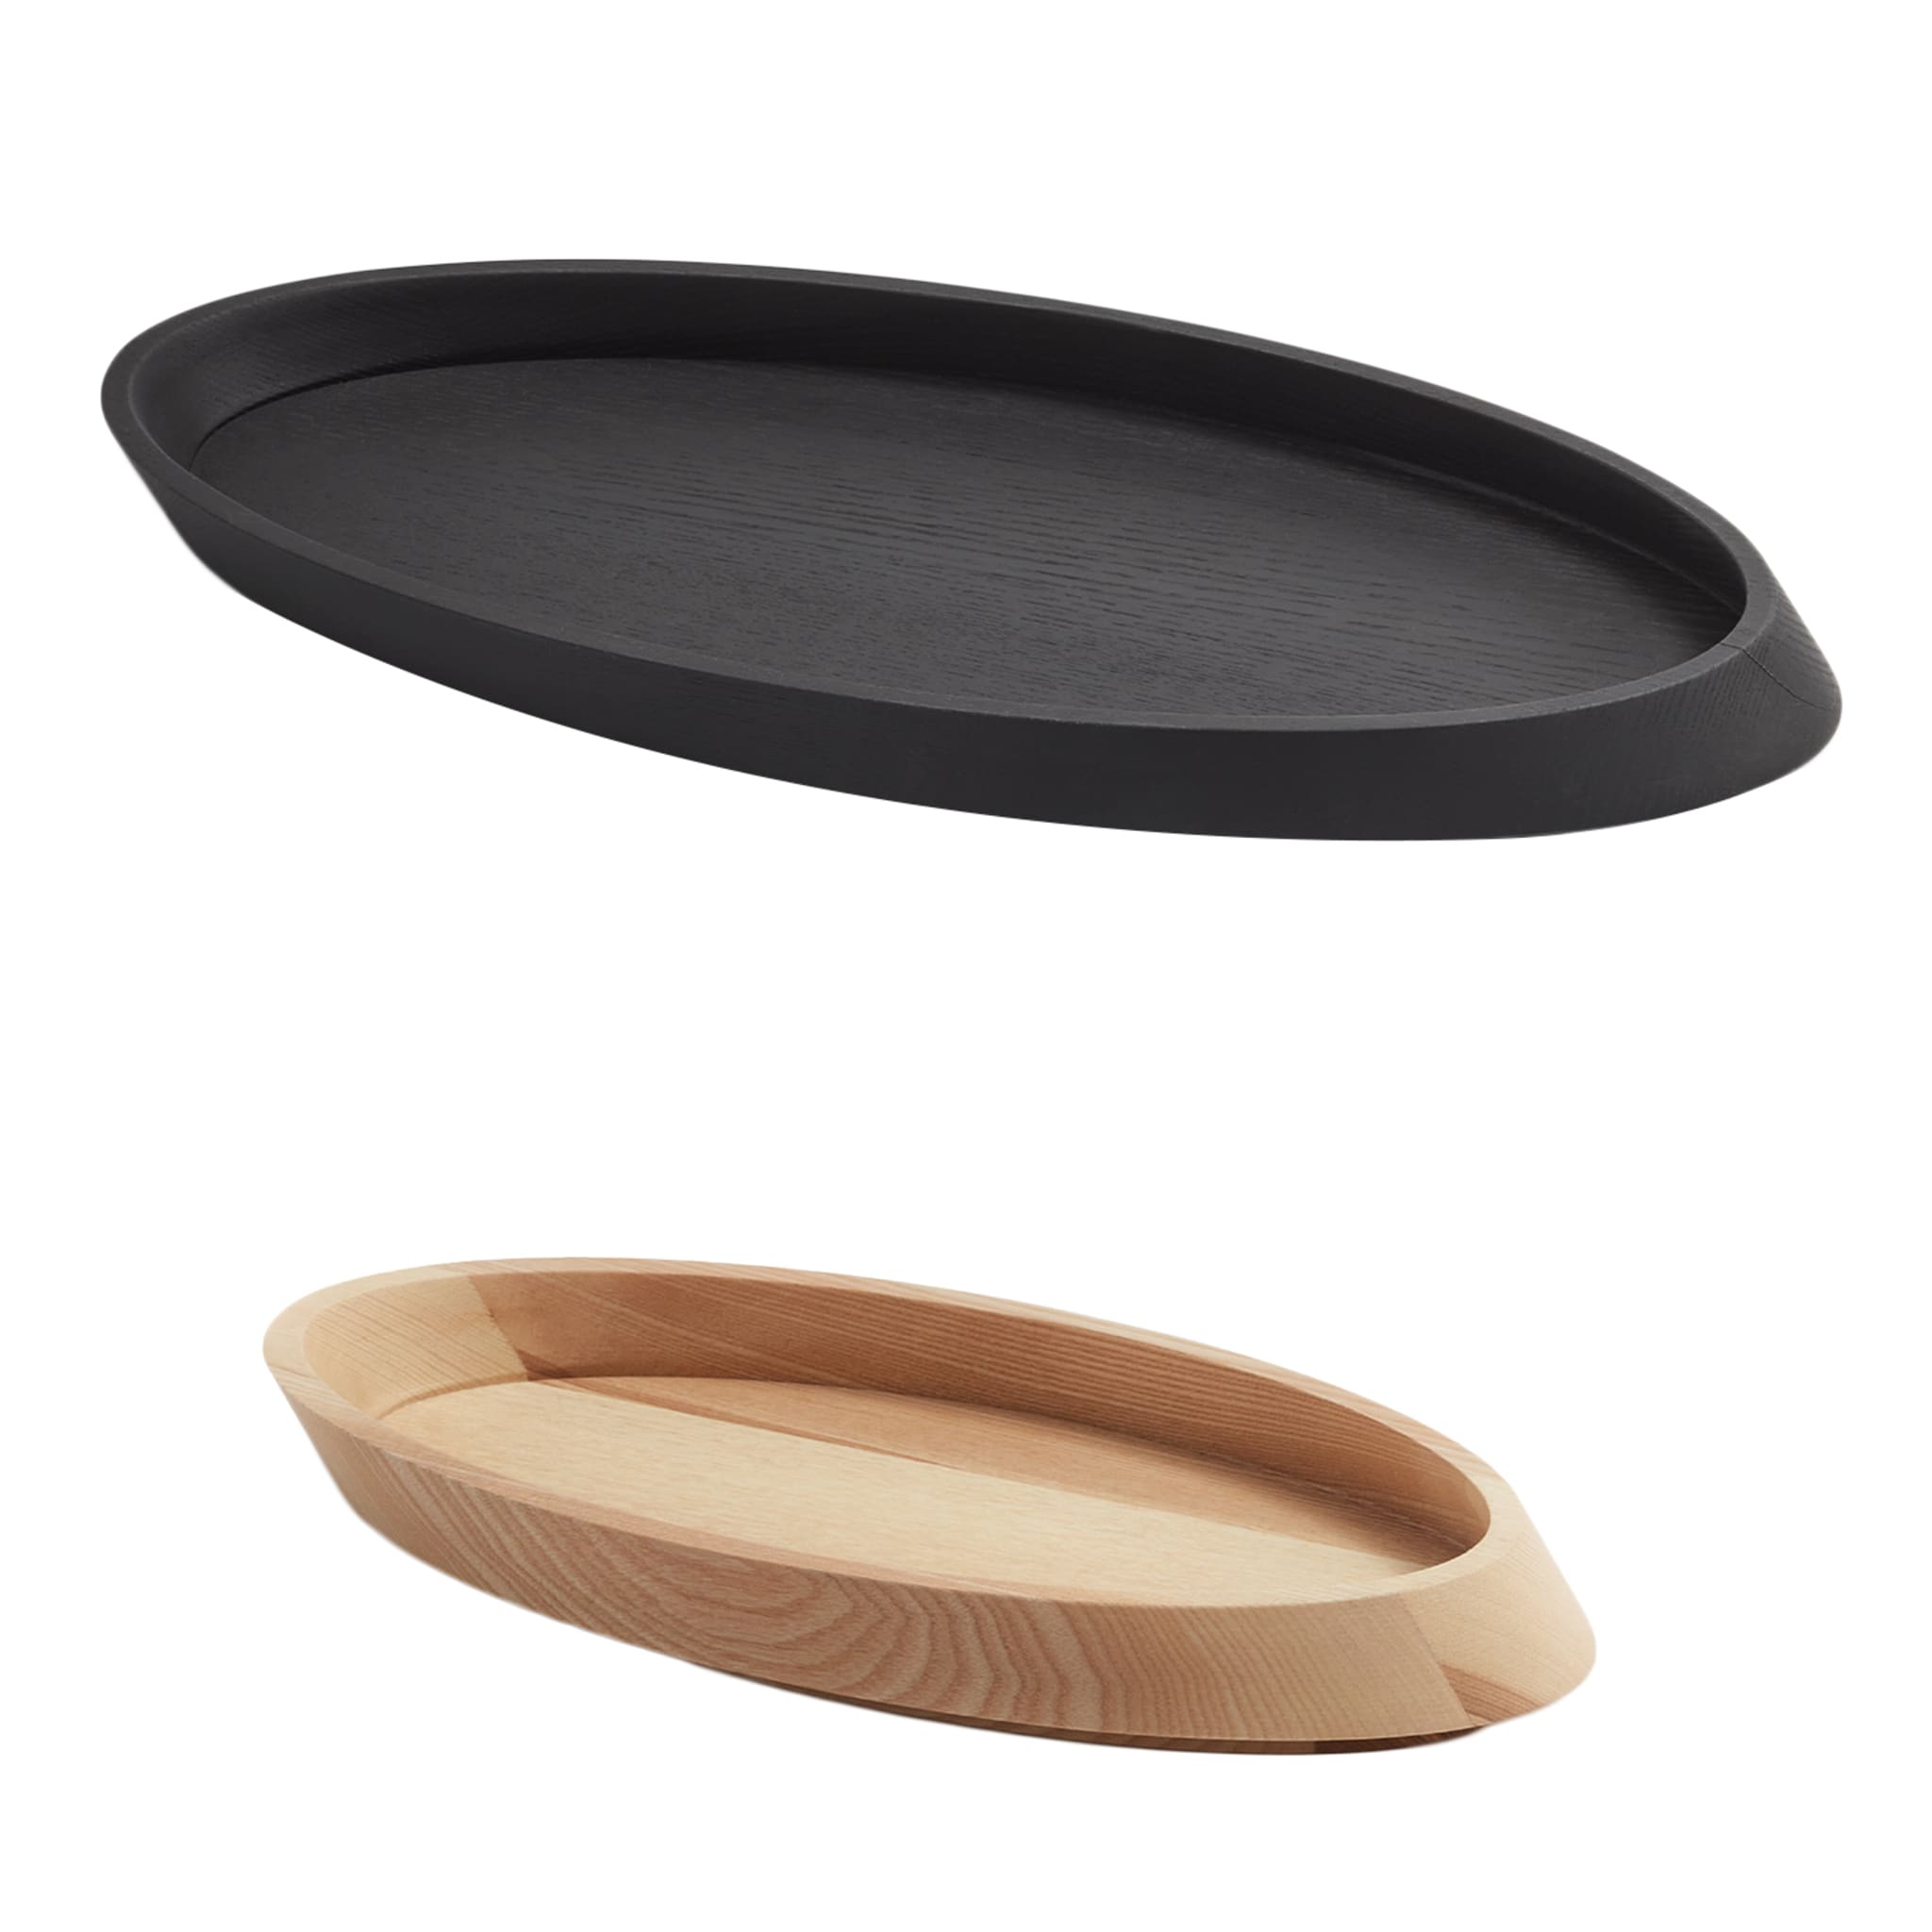 Lily Two-Tone Set of 2 Round Ash Trays by Marta Laudani - Main view